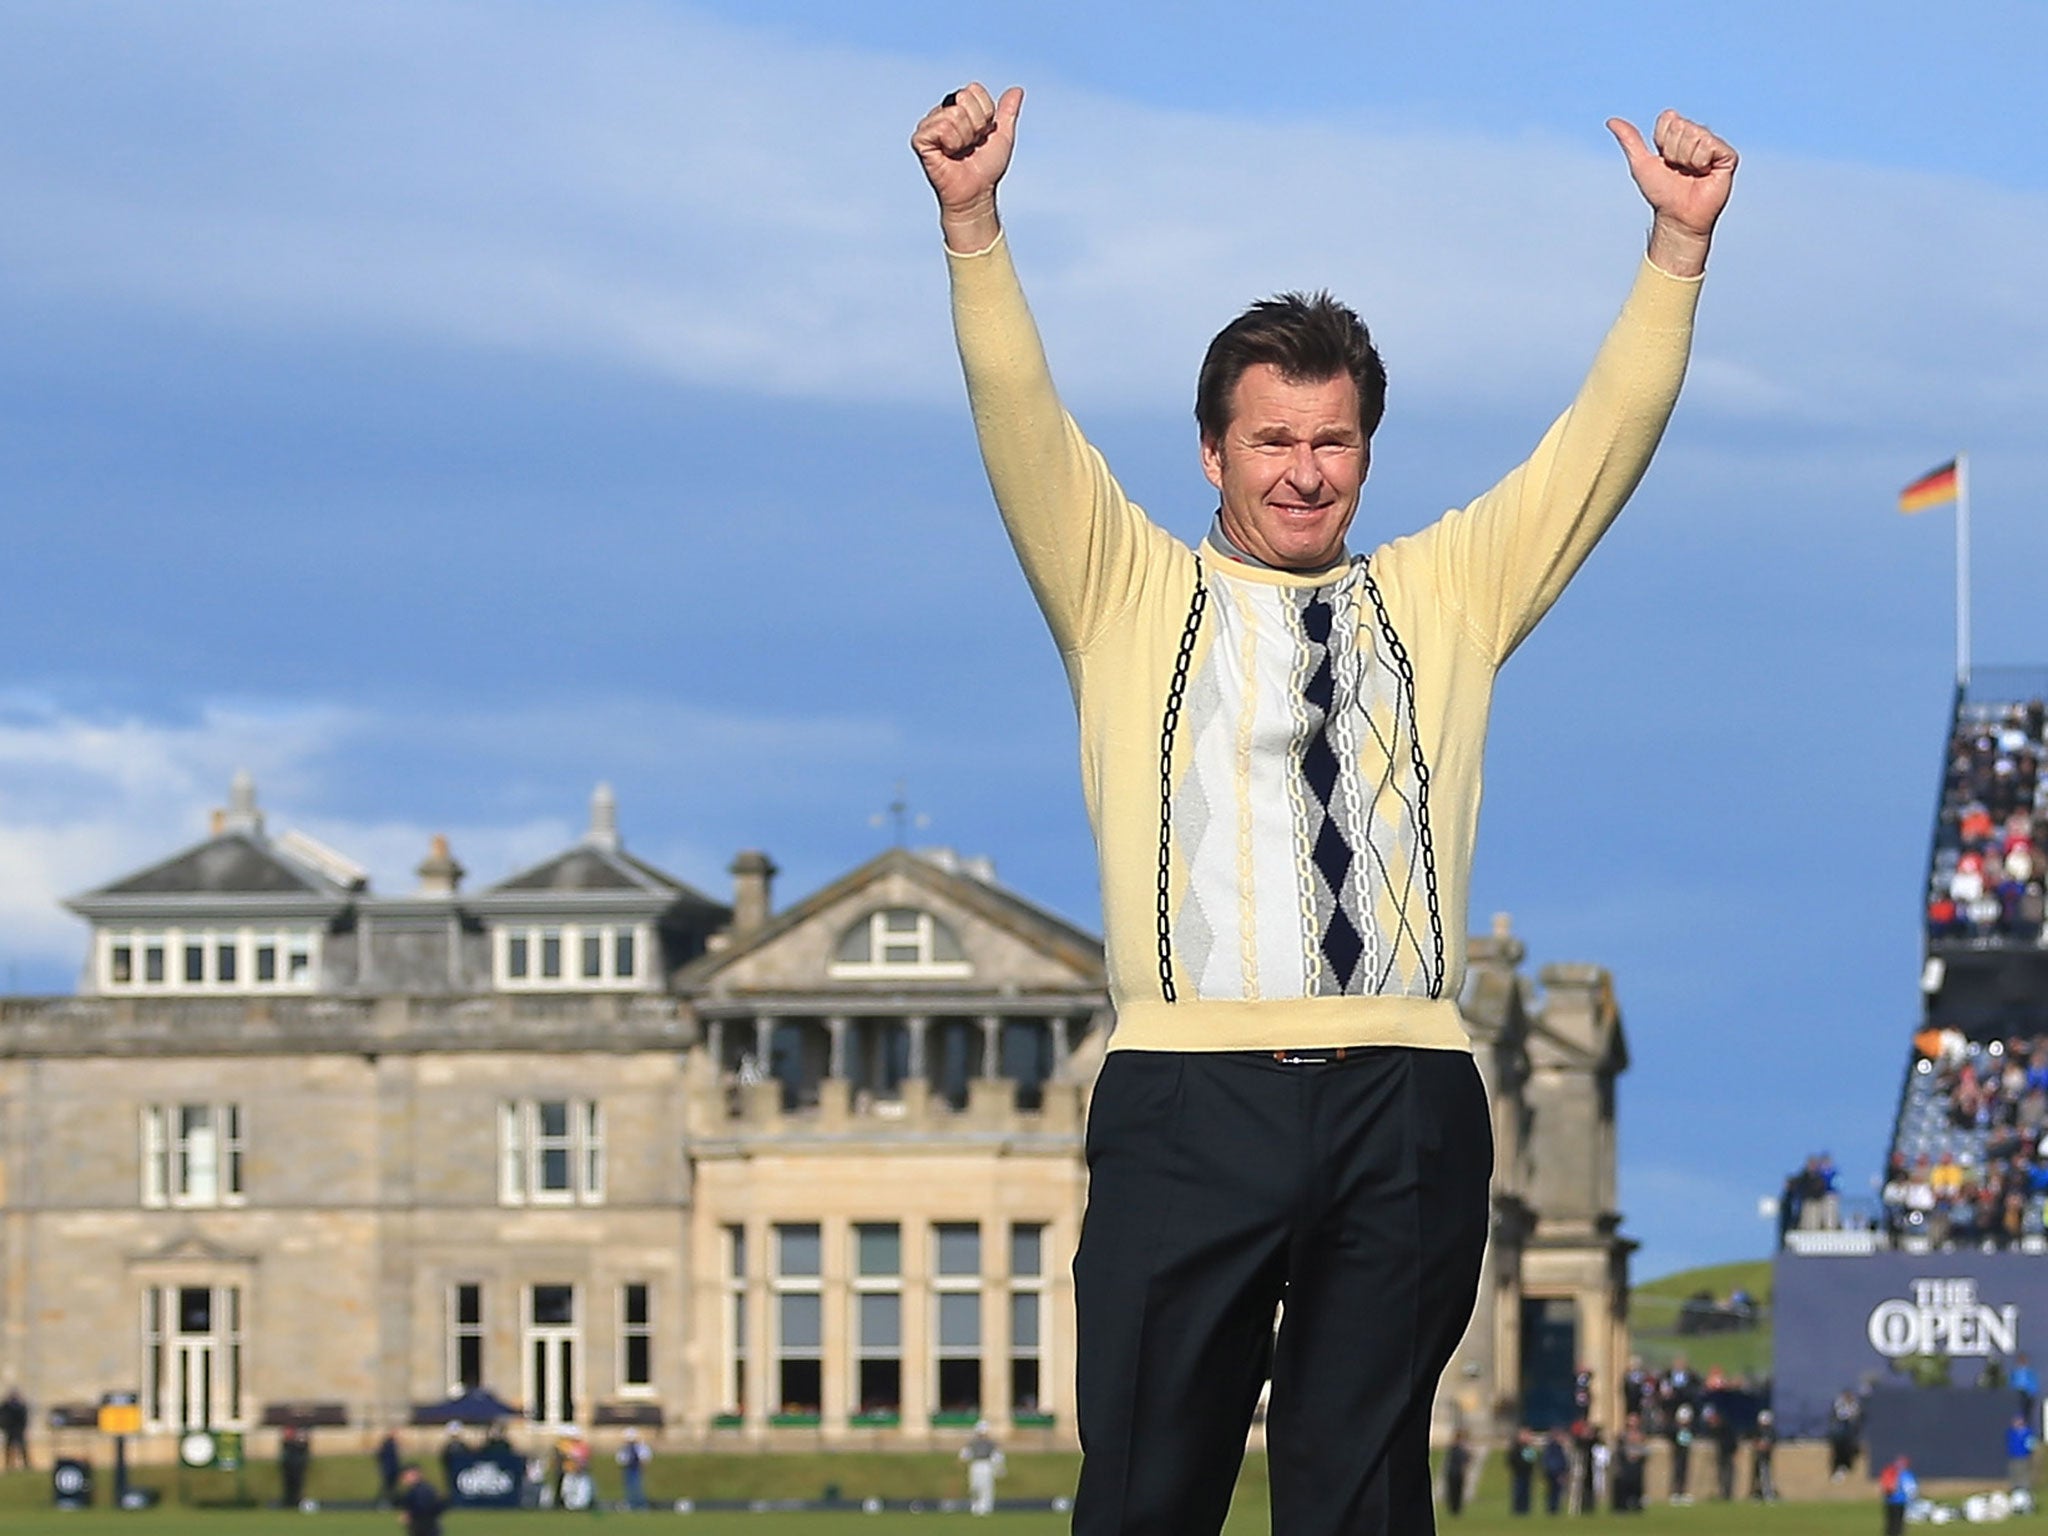 Nick Faldo salutes the crowd as he stands on Swilcan Bridge after his final round at St Andrews